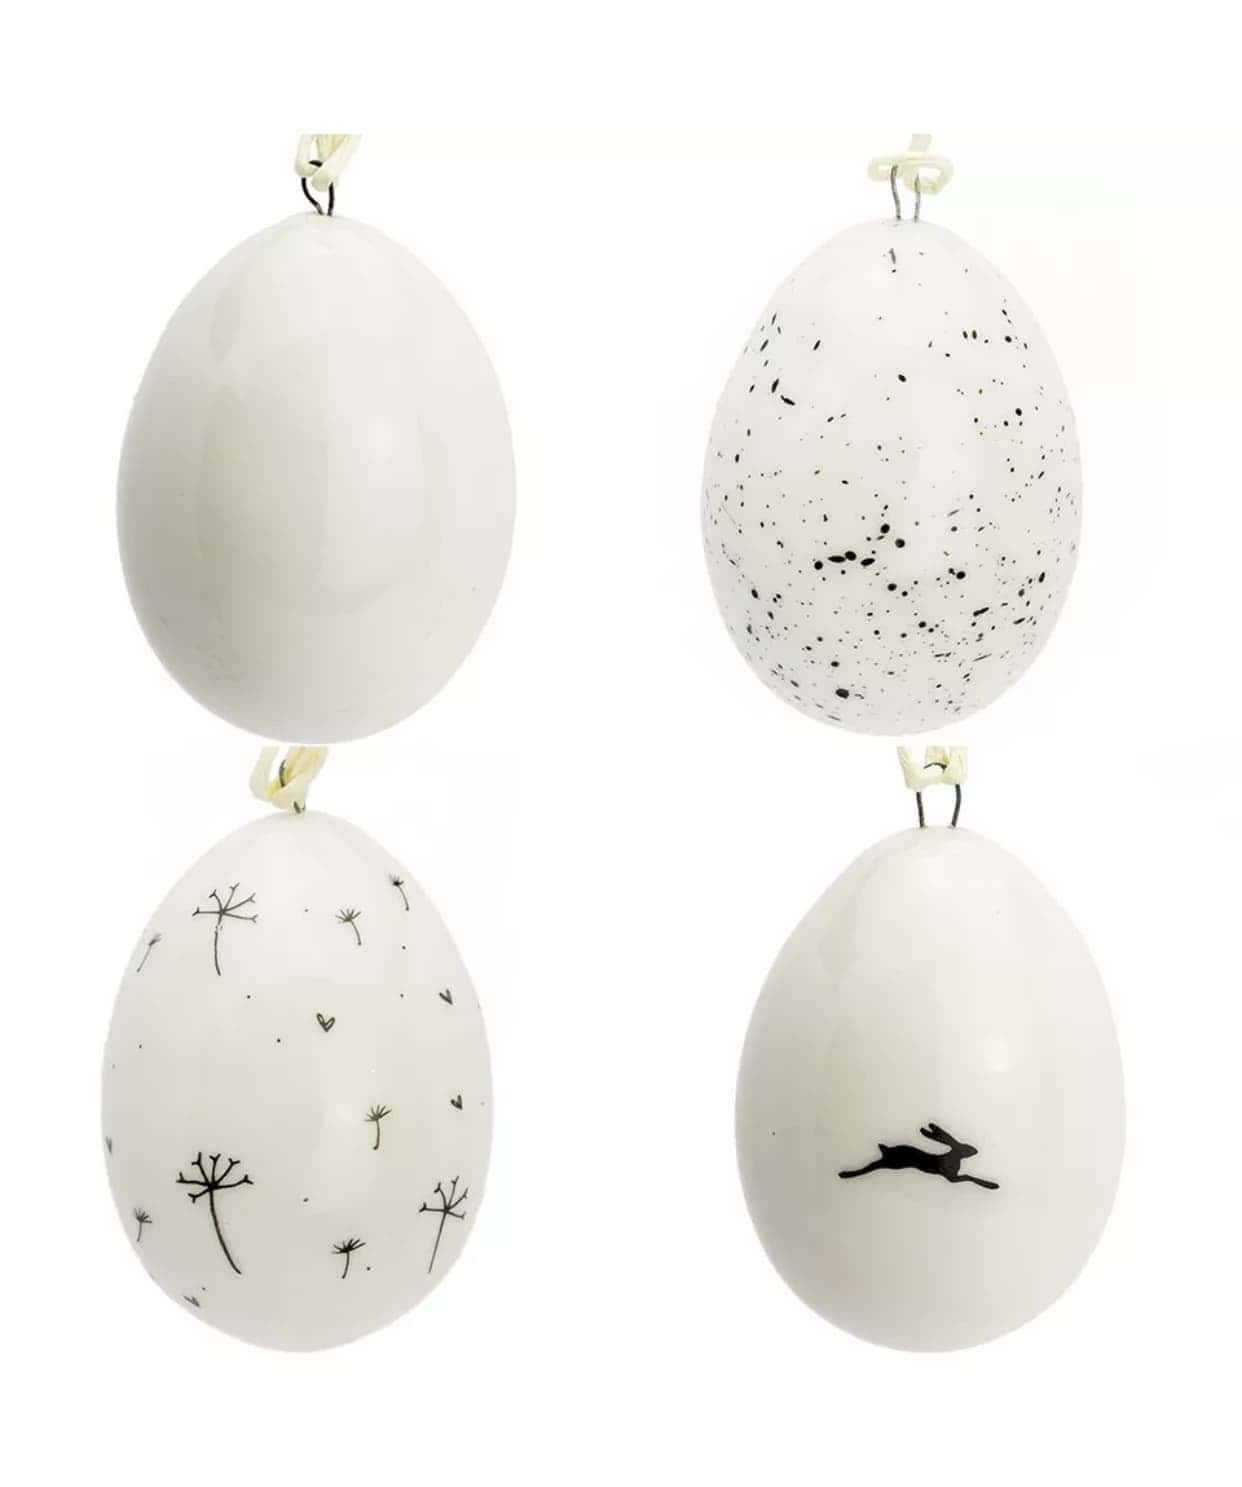 Porcelain Eggs by East Of India